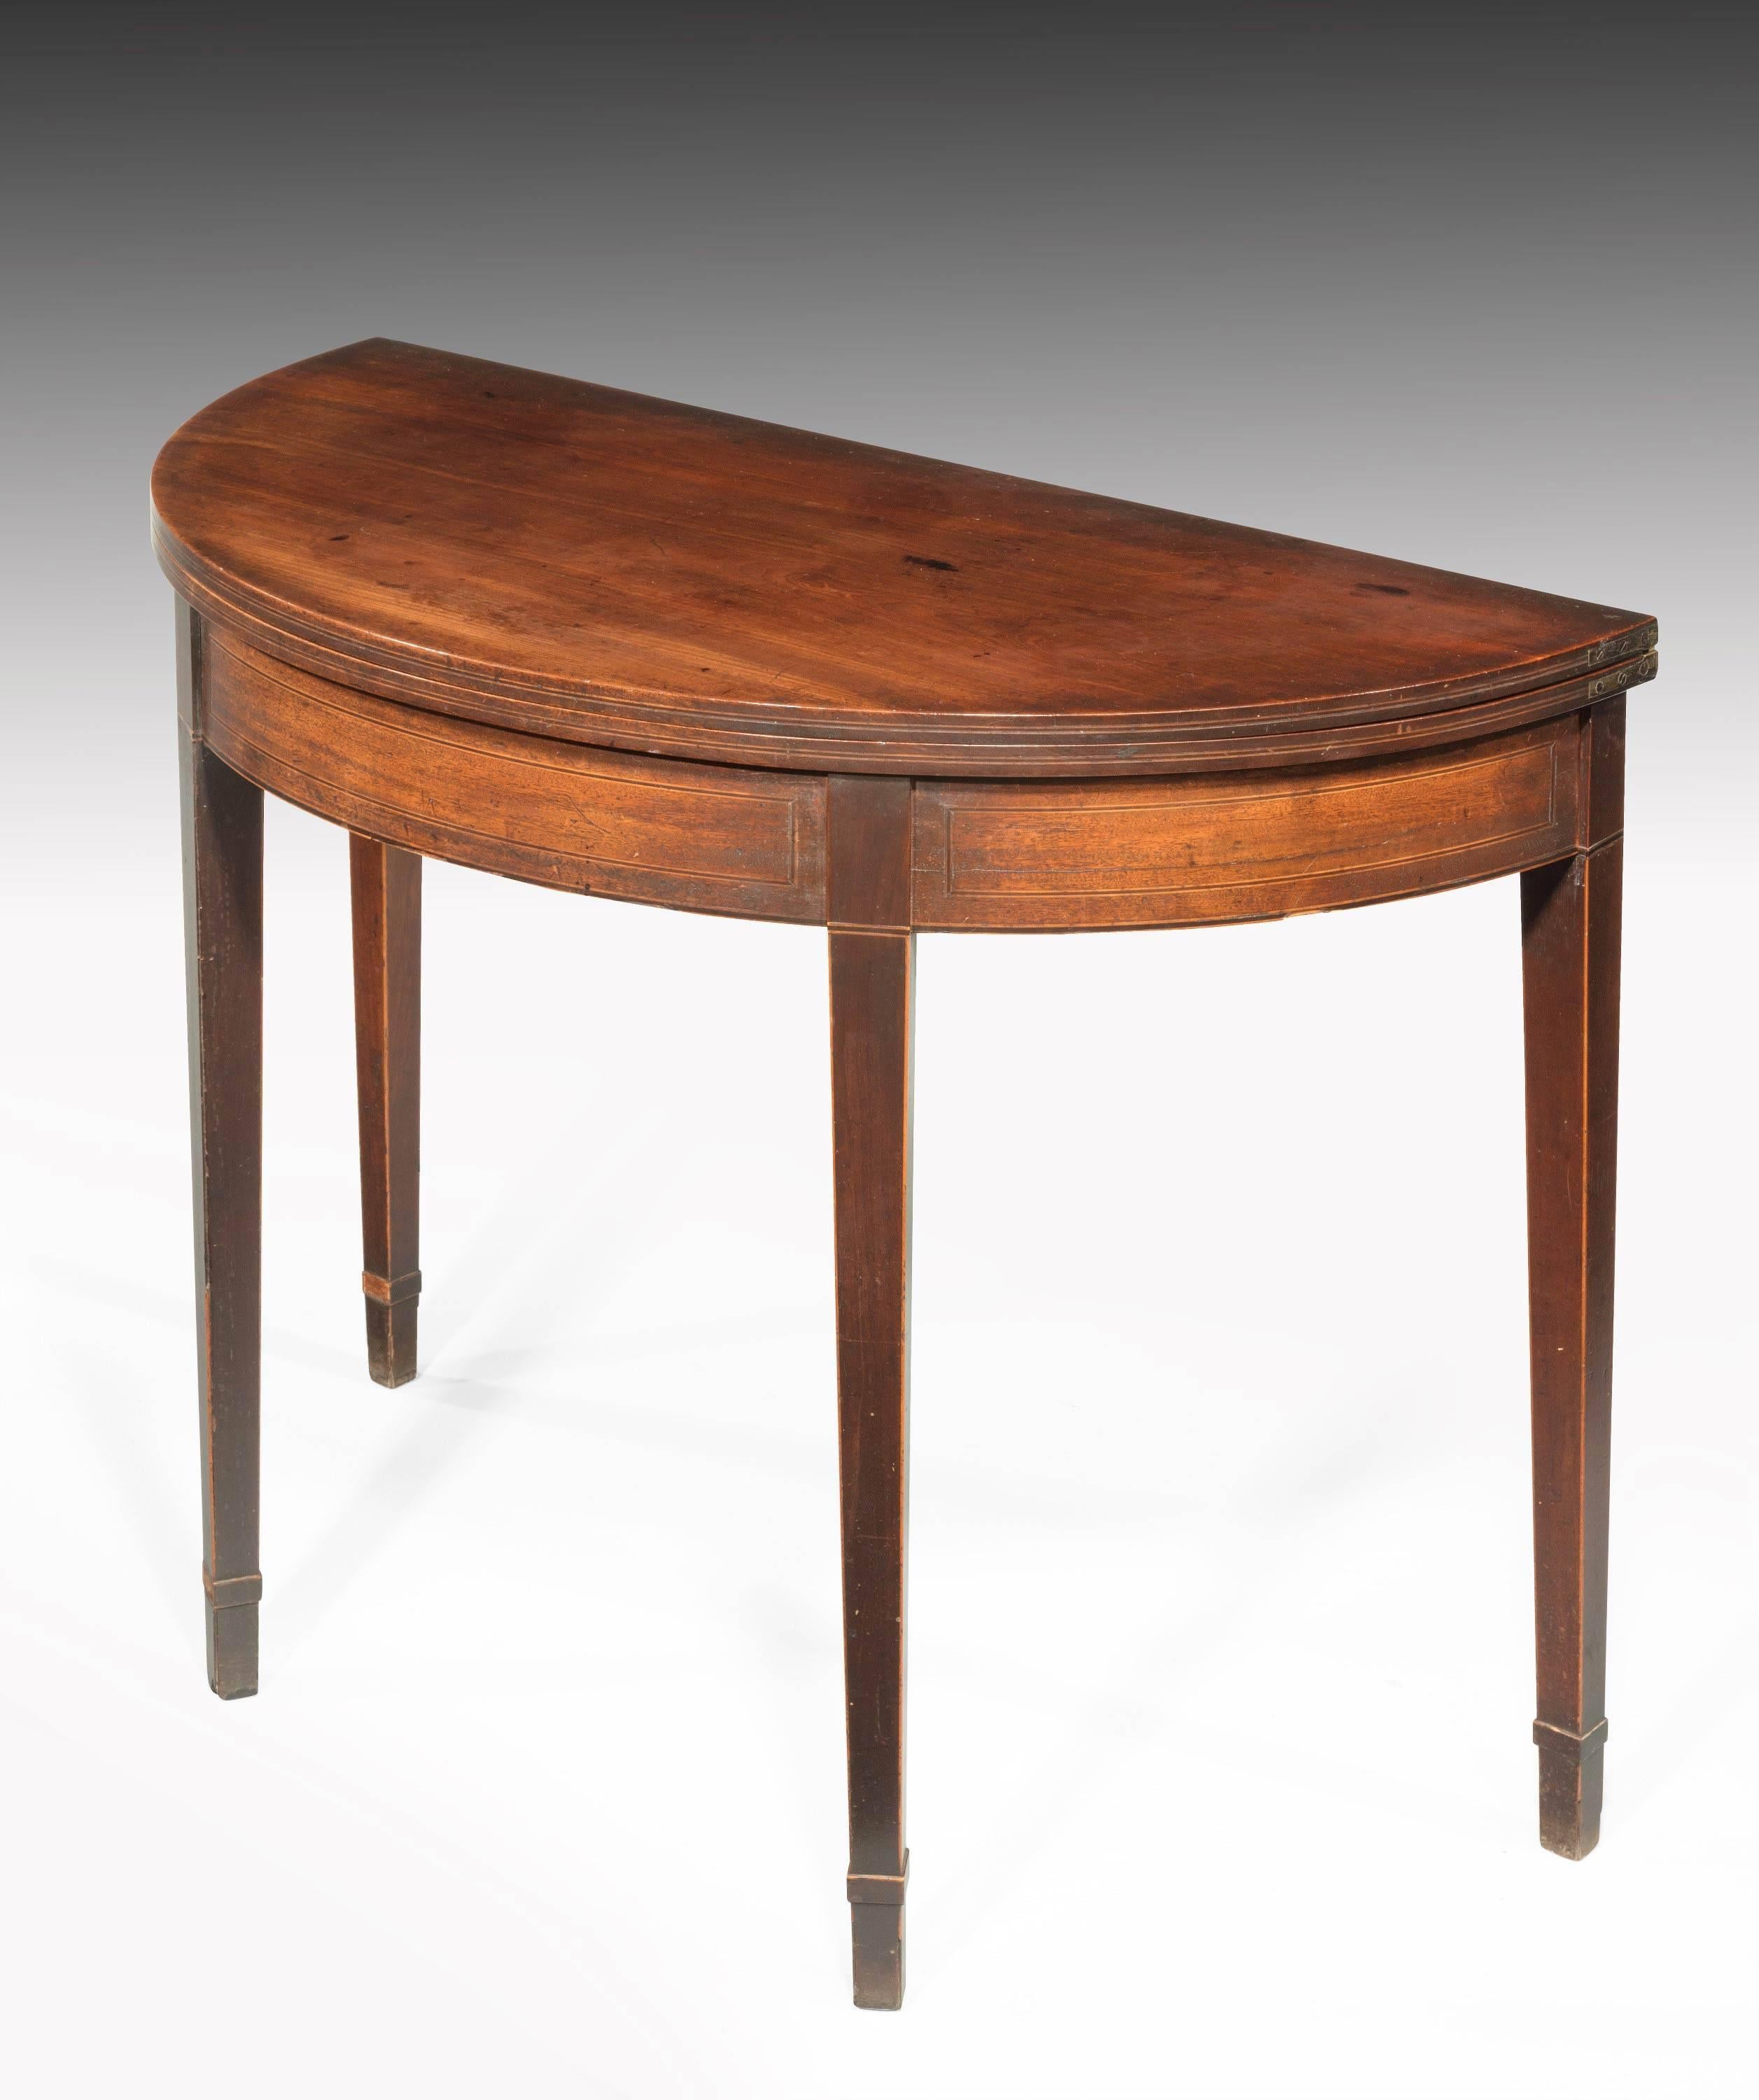 English Pair of George III Period Mahogany Demilune Card Tables with Fine Line Inlay